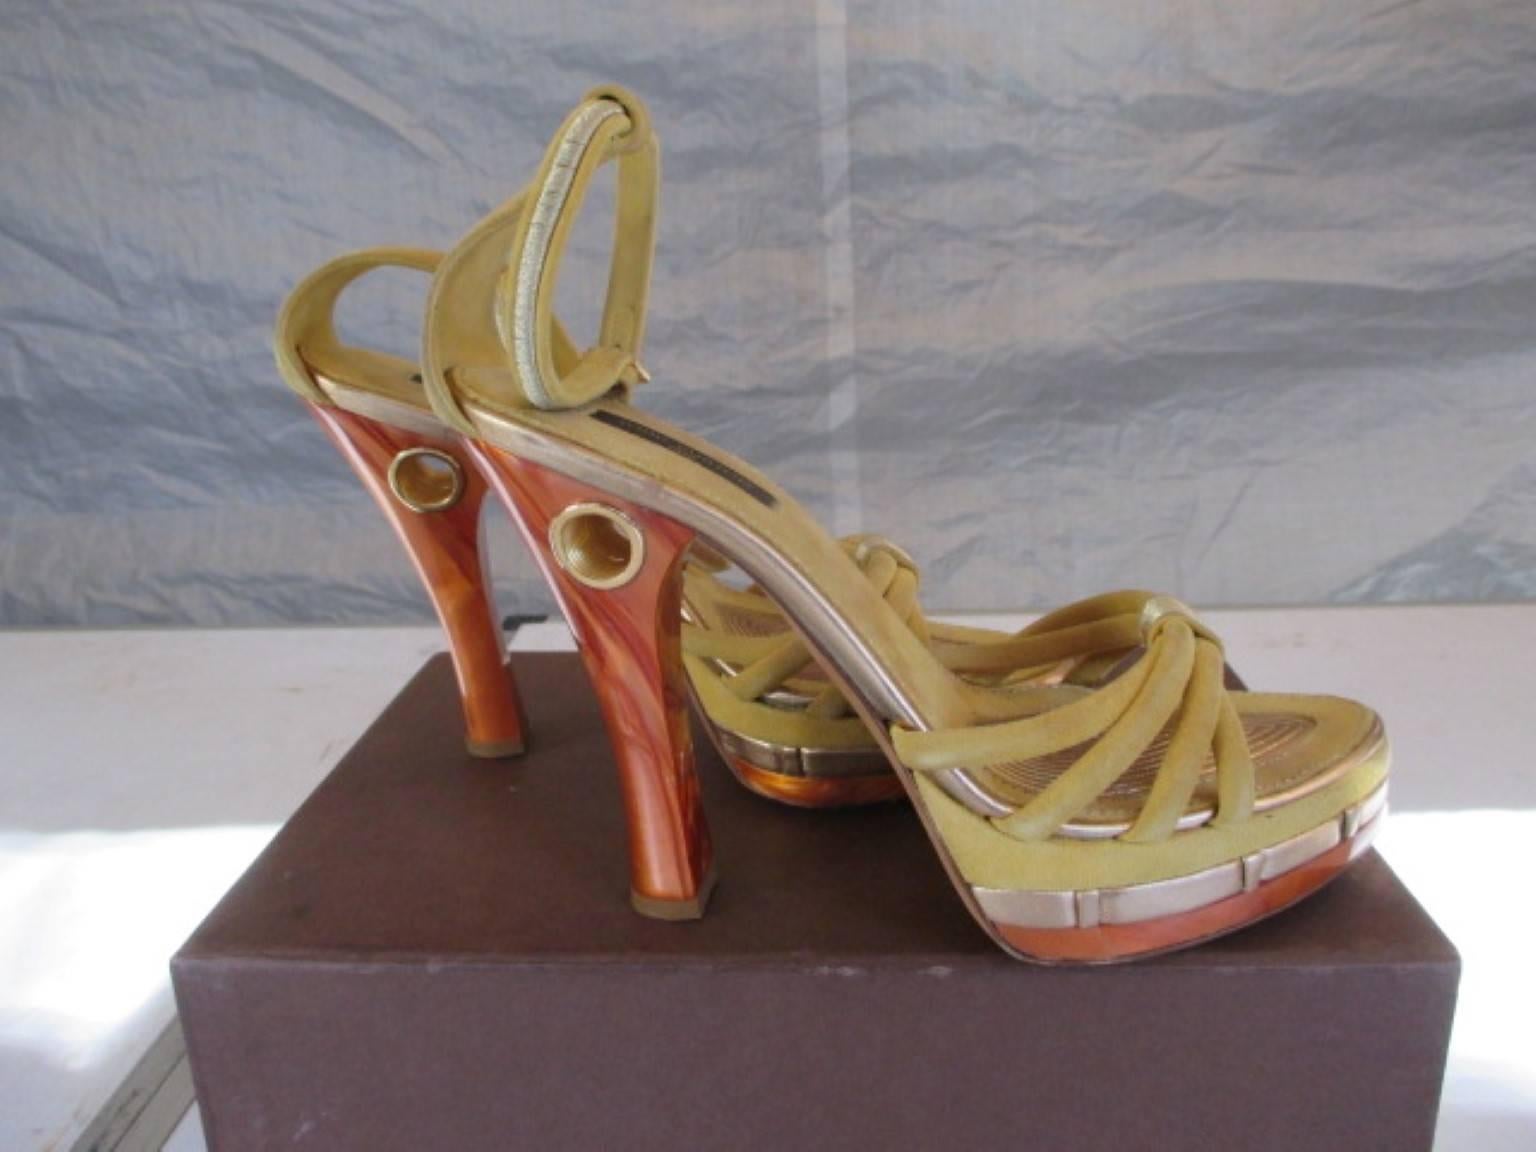 Authentic Louis Vuitton limited edition yellow suede and gold leather Cleo Pompeii sandals. 

We offer more exclusive vintage items, view our frontstore

Details:
Features an open toe, faux tortoiseshell accents, a 1.25 inch platform, a